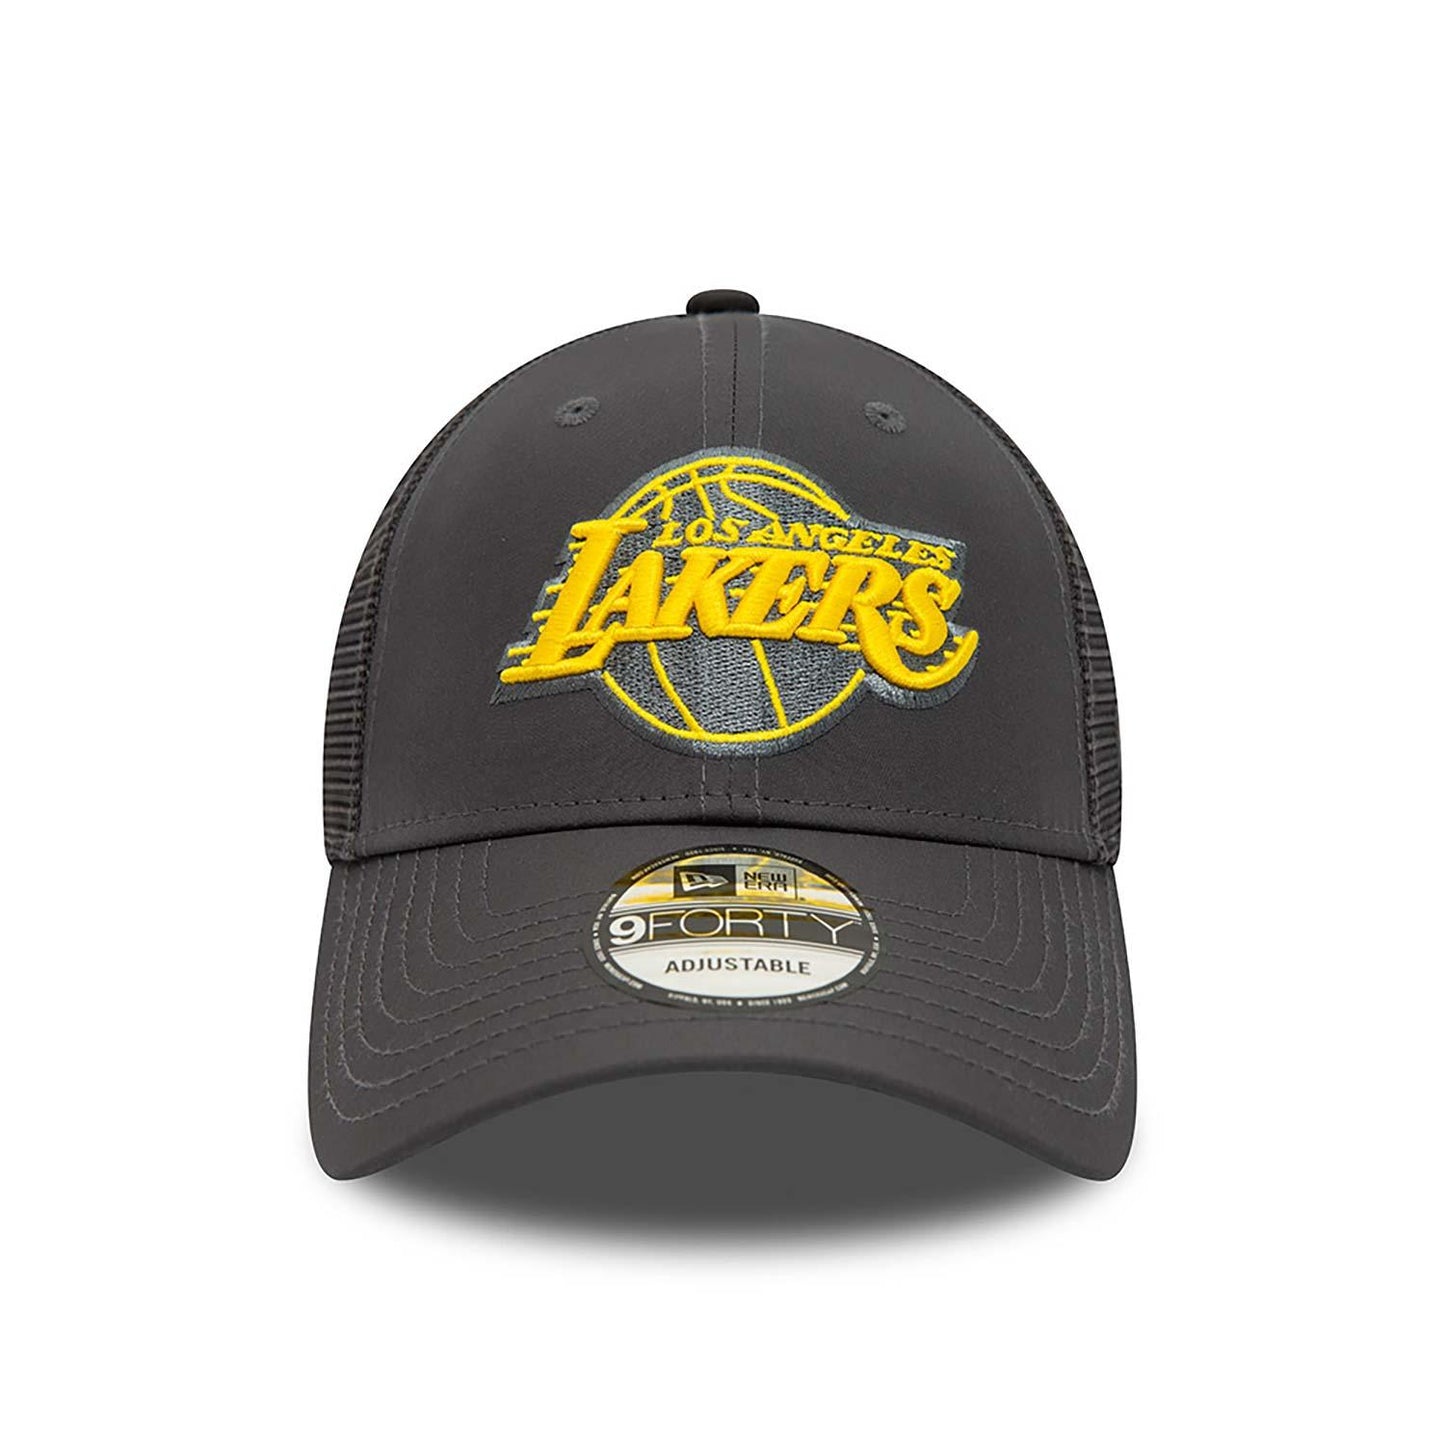 NEW ERA 9FORTY A-FRAME LOS ANGELES LAKERS HOME FIELD GREY CAP